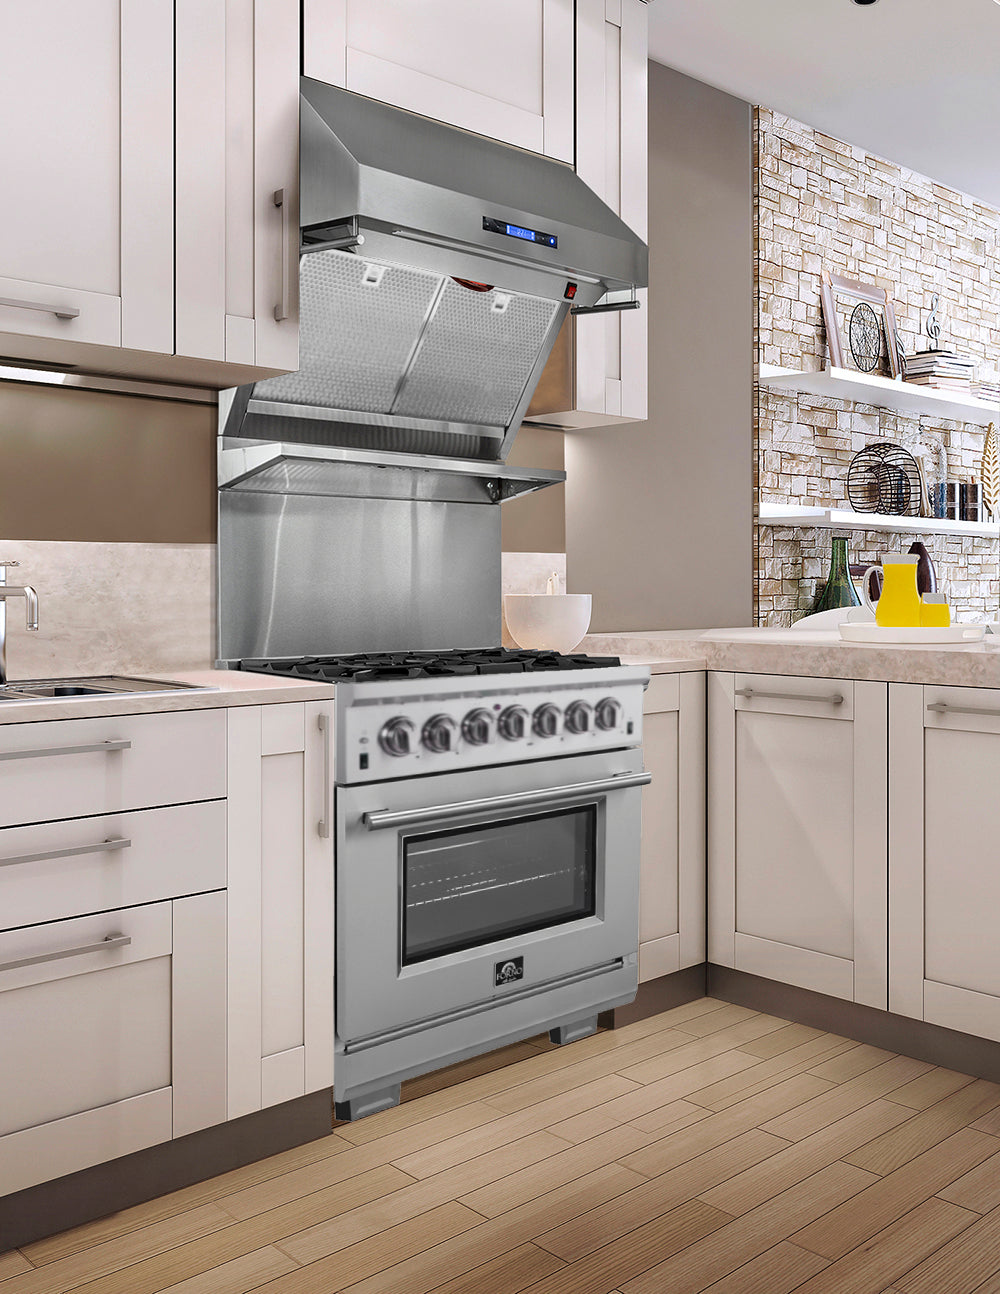 Forno Capriasca - Titanium 30 in. 4.53 cu. ft. Professional Freestanding Dual Fuel Range (FFSGS6187-30) Installed in a luxury kitchen